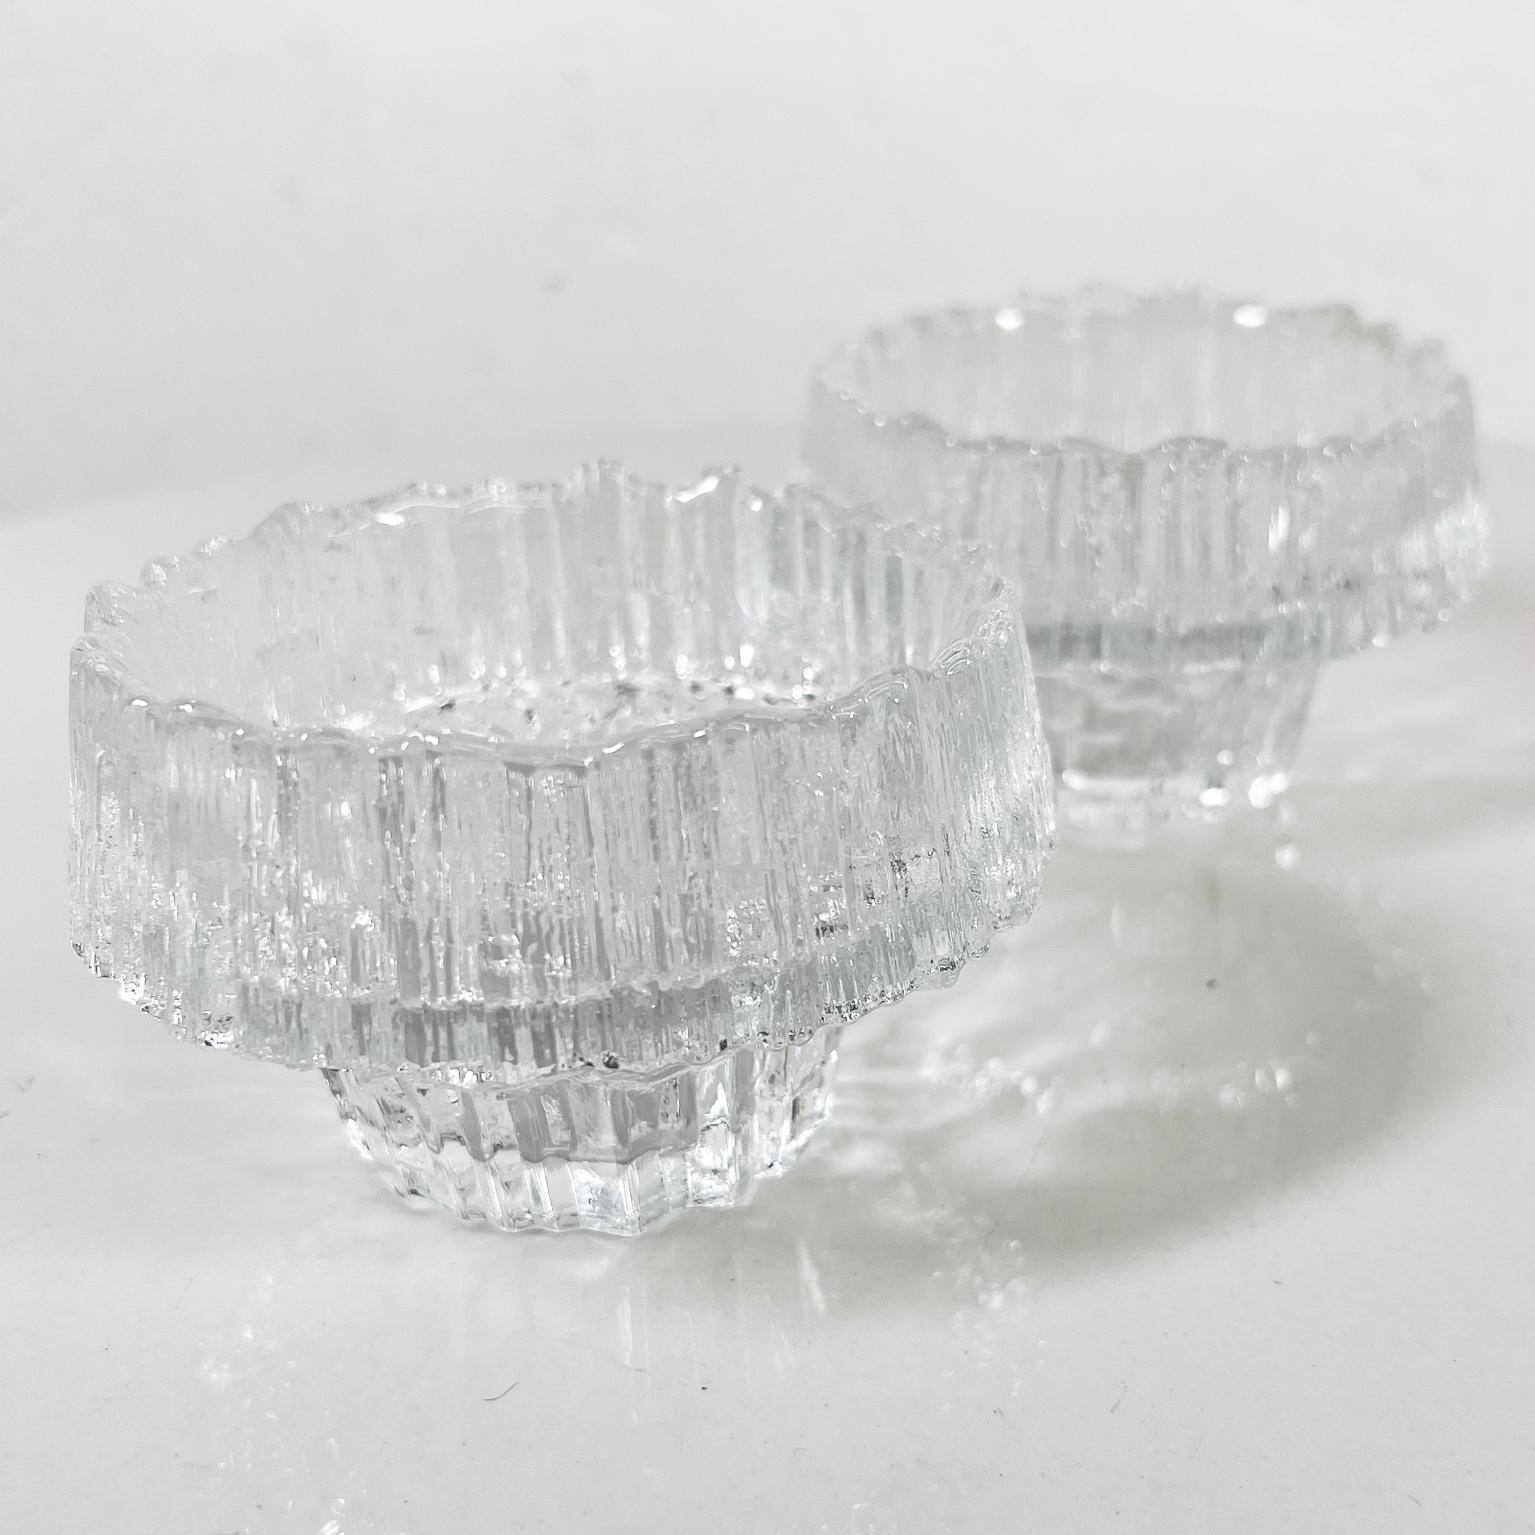 1970s Iittala Stellaria Votive Candle Holder Art Glass by Tapio Wirkkala Finland
Crystal icicle art glass
Selling as a pair
4.25 diameter x 2.63 h
Preowned original vintage condition.
Refer to images please.